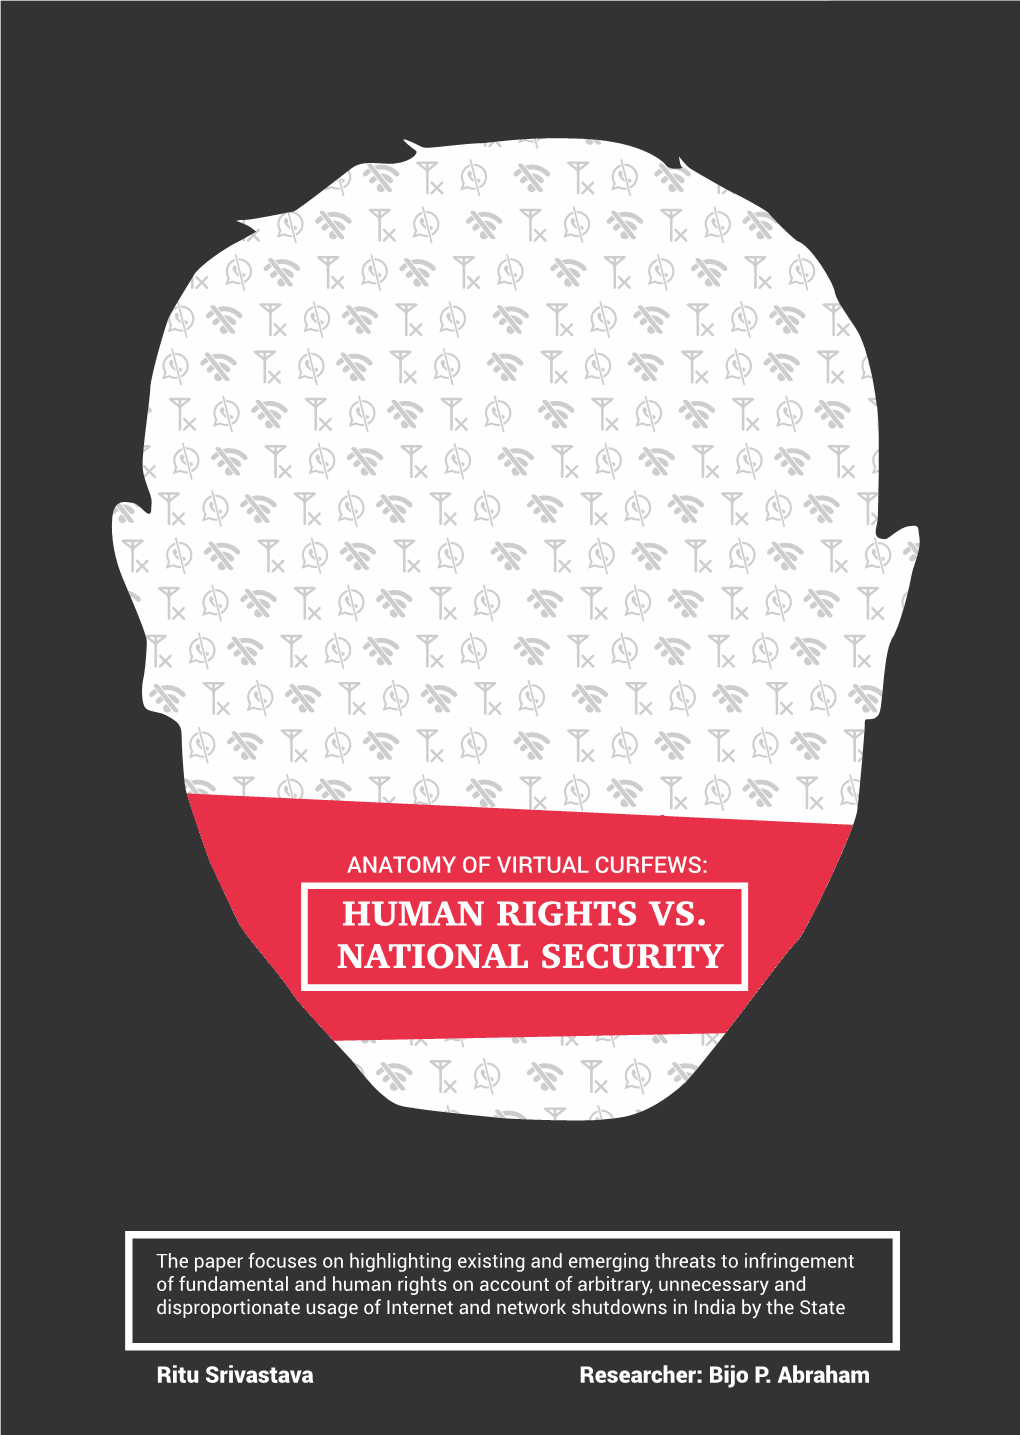 Human Rights Vs. National Security